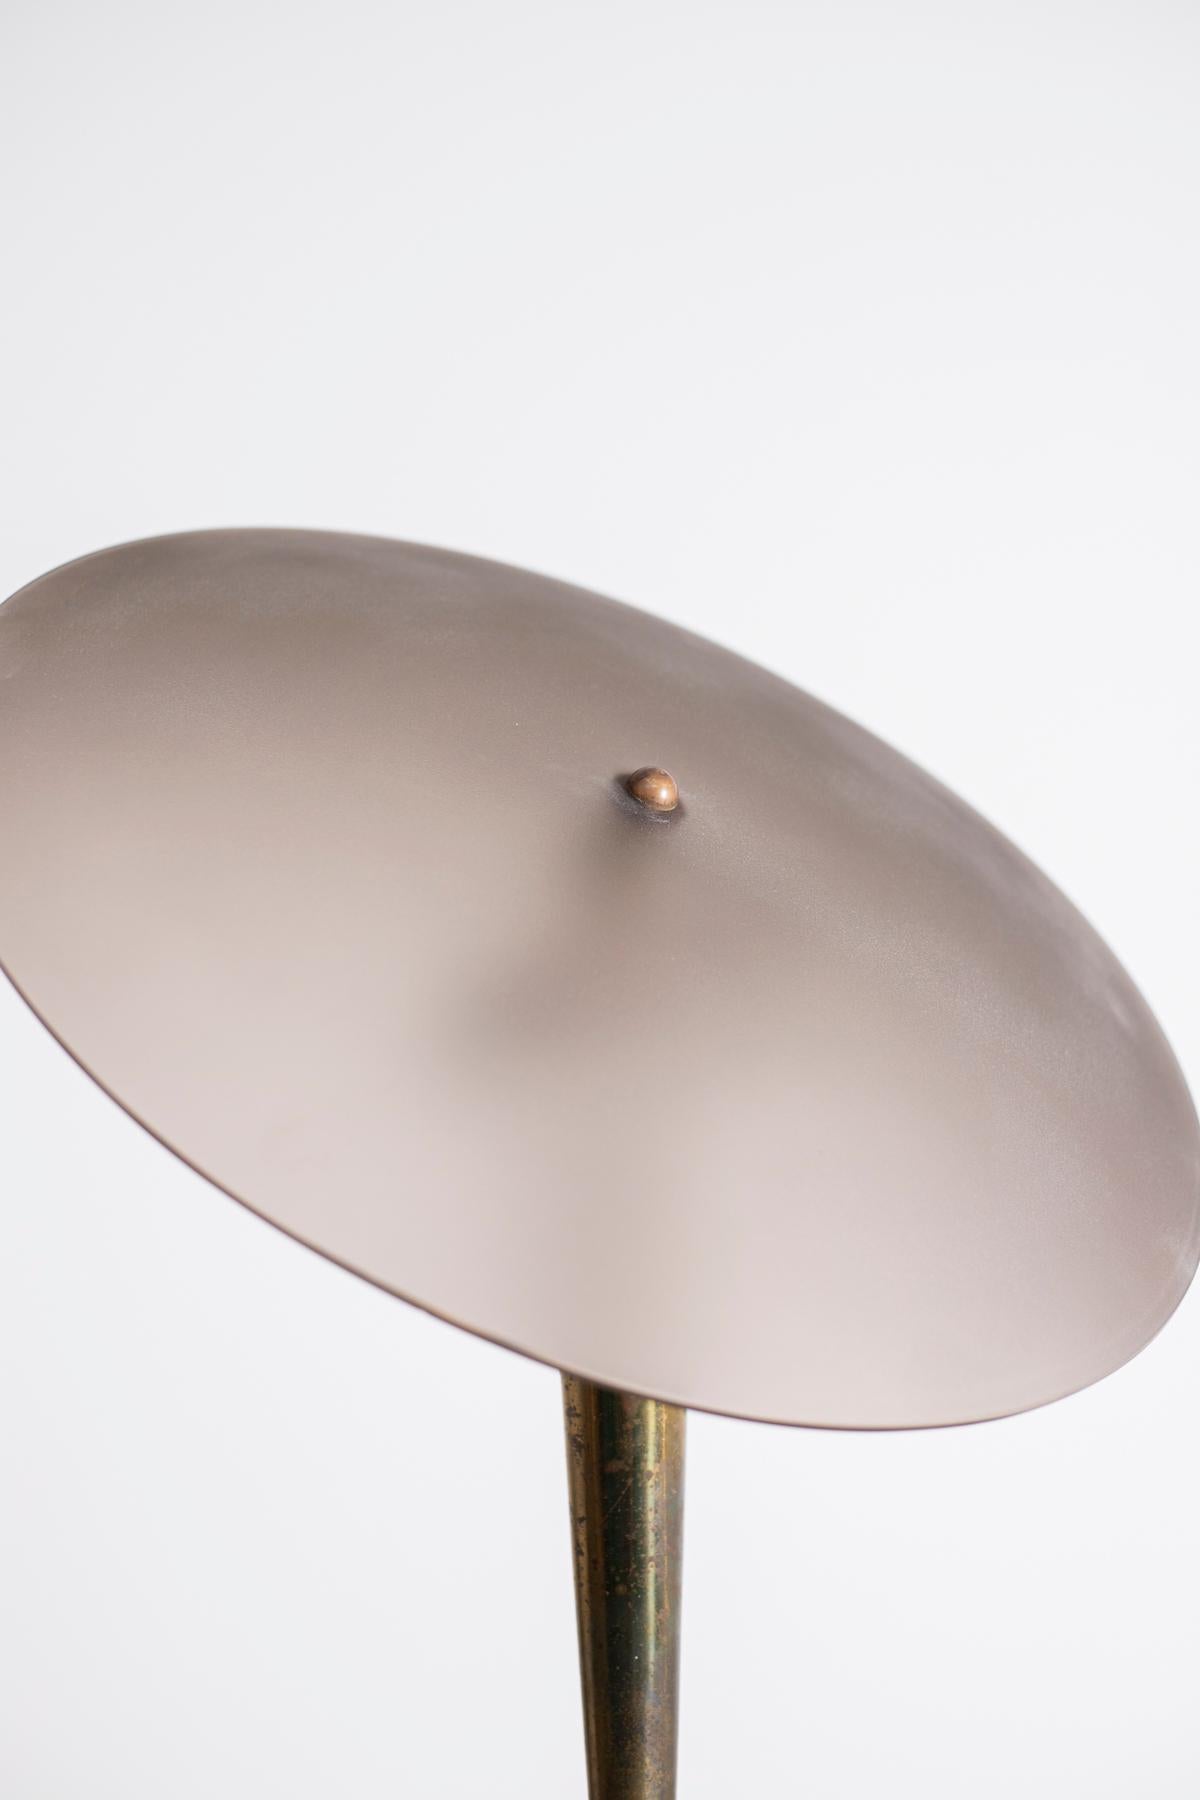 Mid-20th Century Italian Table Lamp by Fontana Arte Signed Fx Attributed to Pietro Chiesa, 1950s